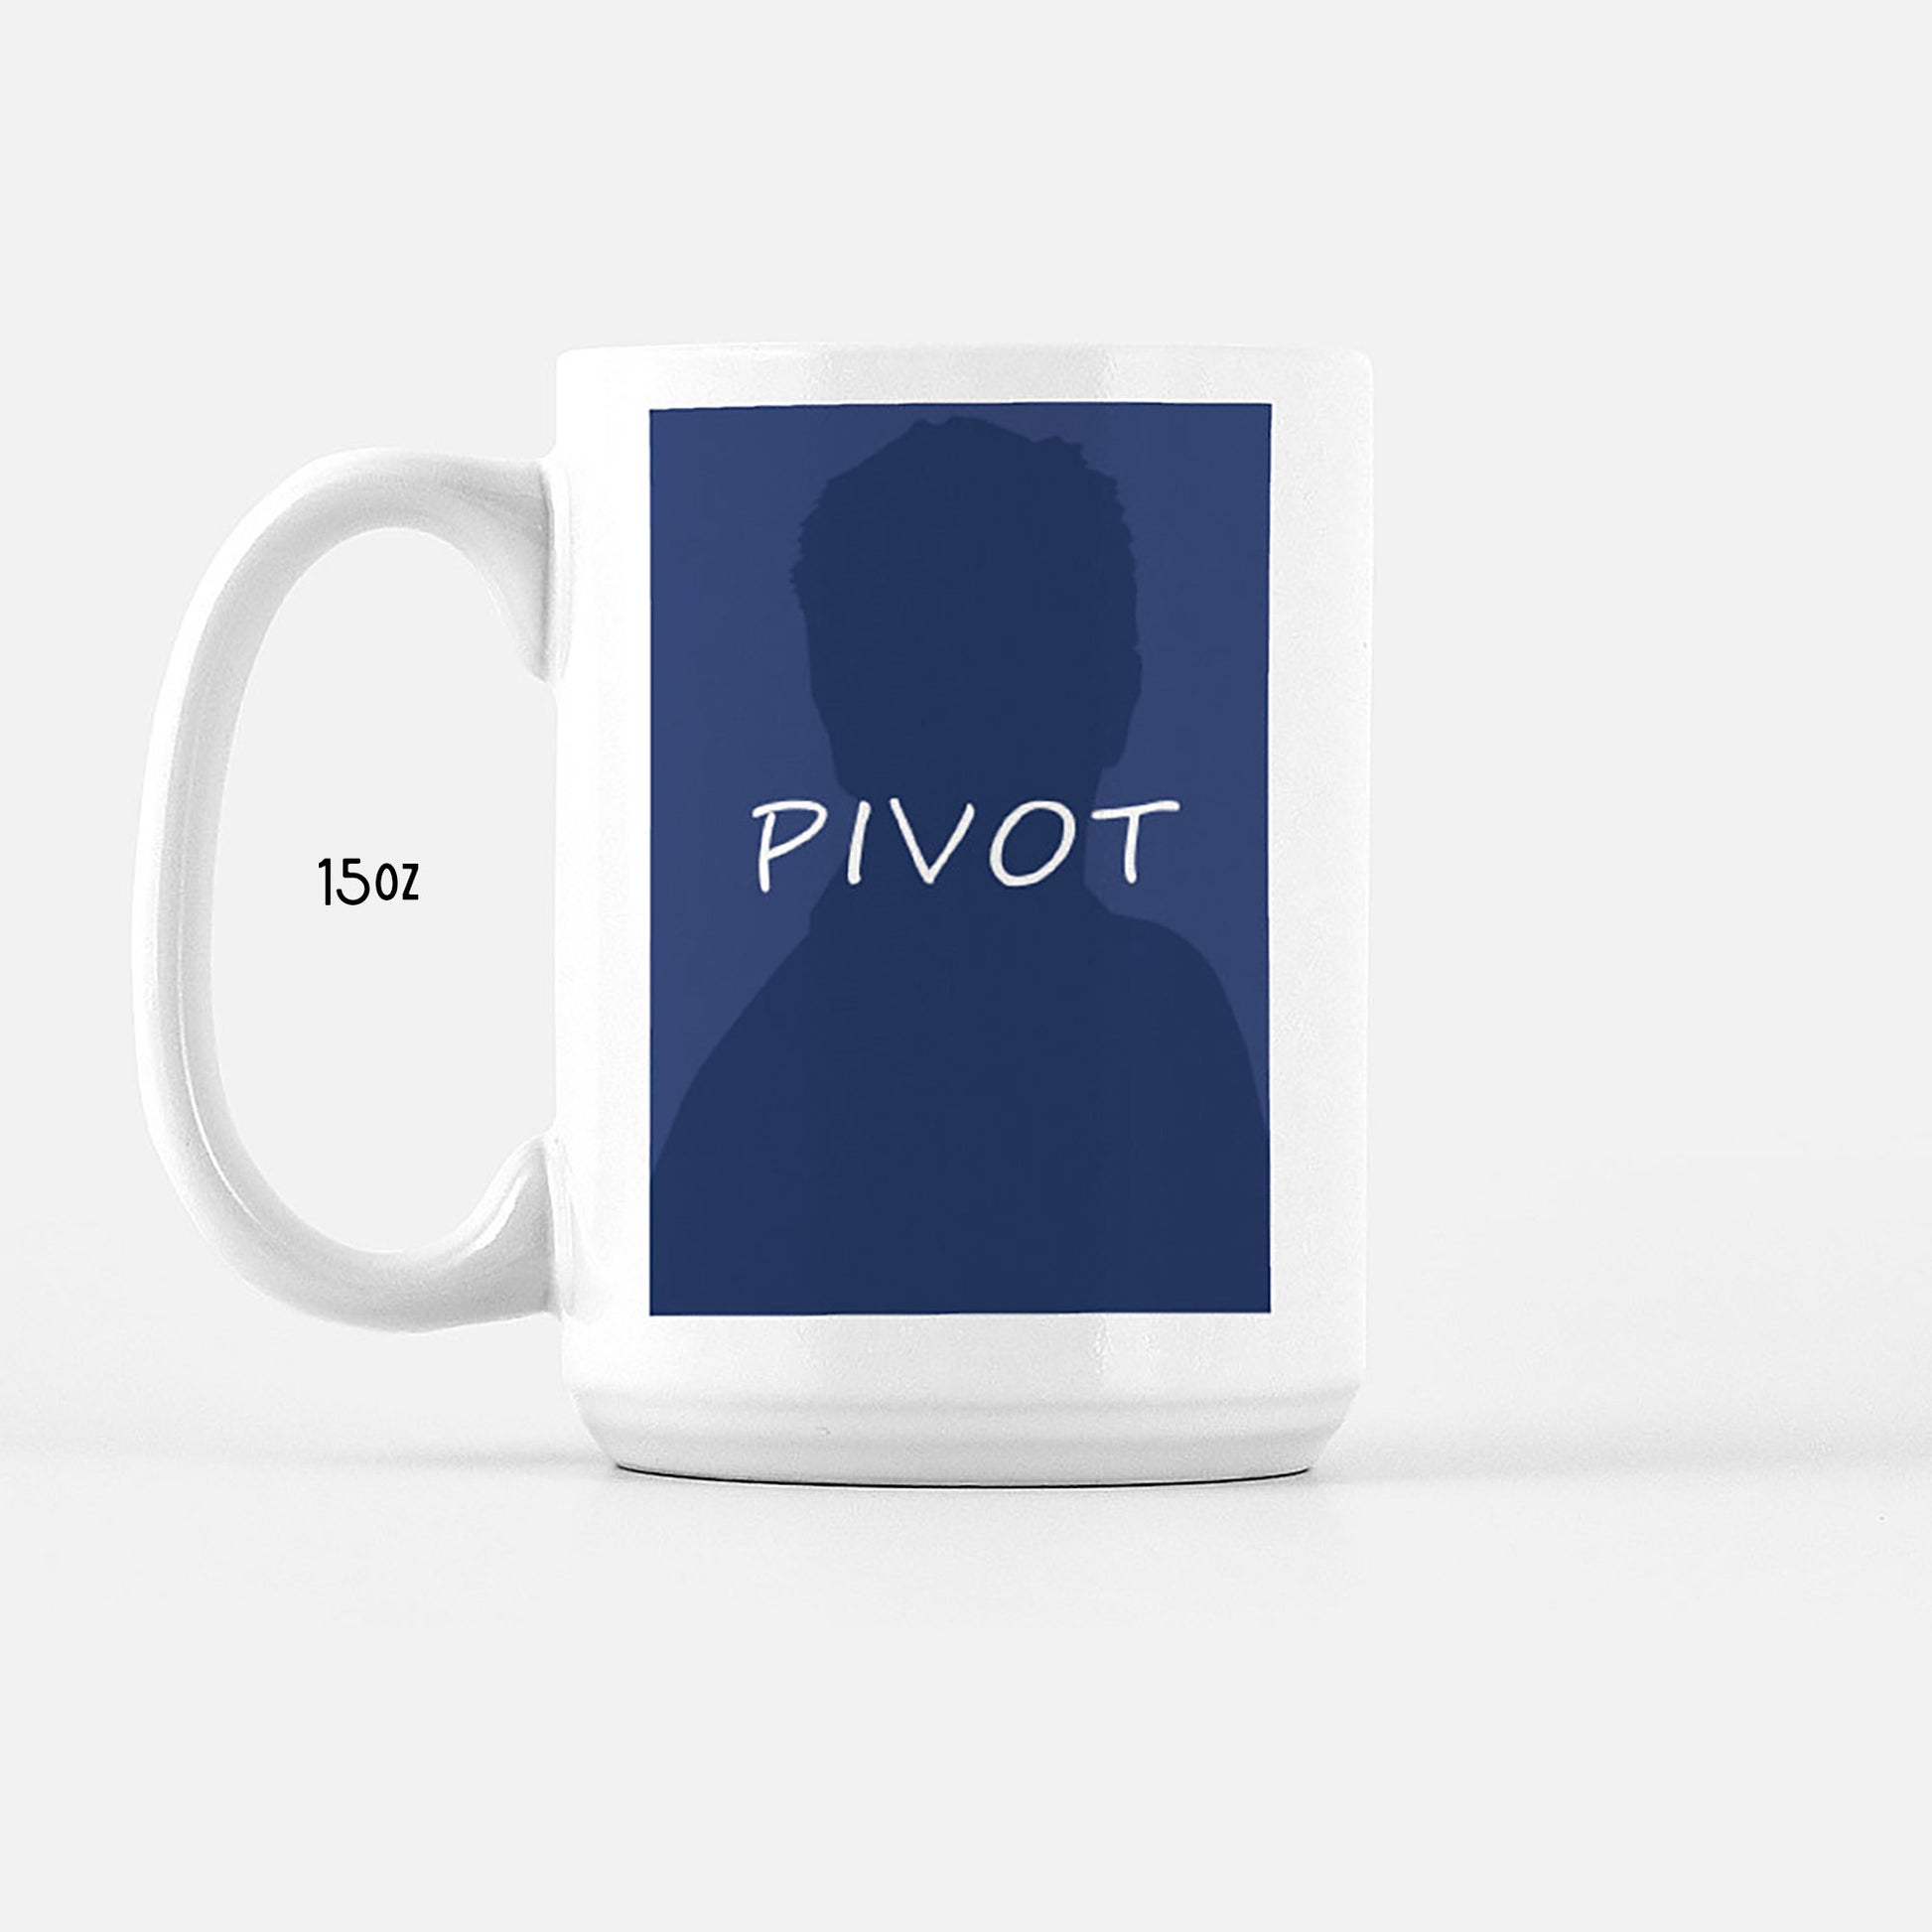 Ross Geller from Friends TV Show Mug with PIVOT quote